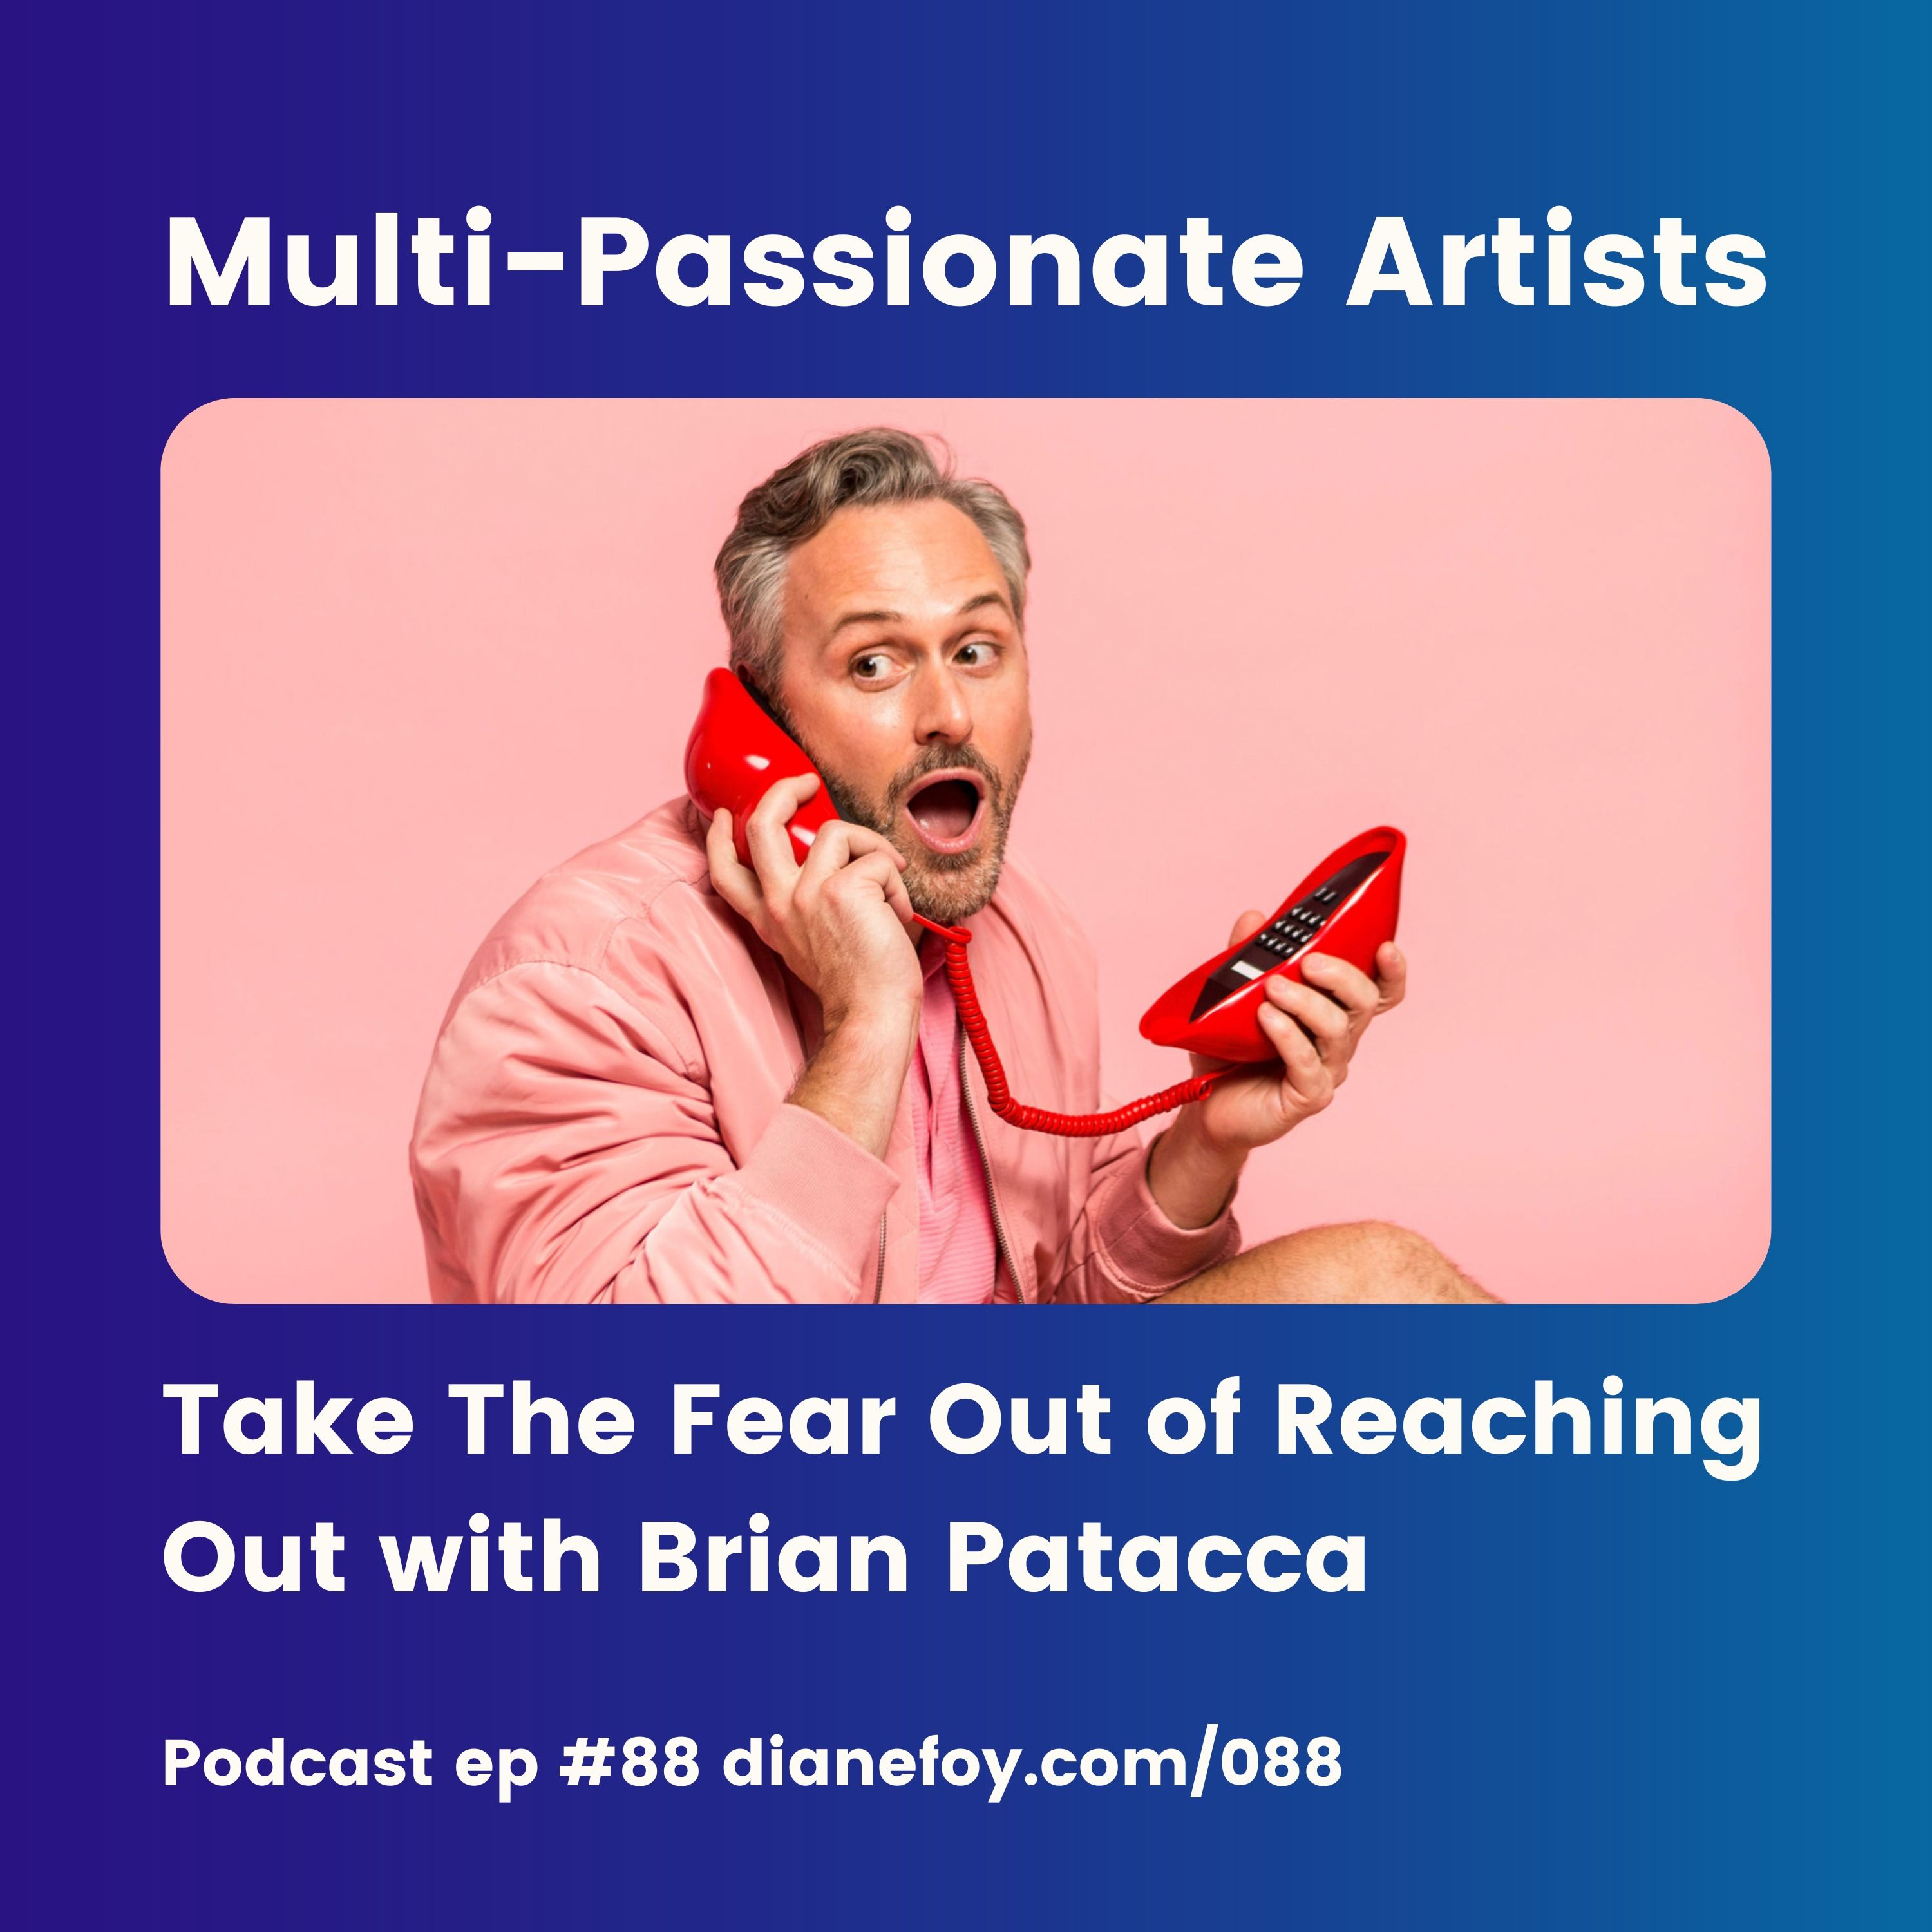 Take The Fear Out of Reaching Out With Brian Patacca